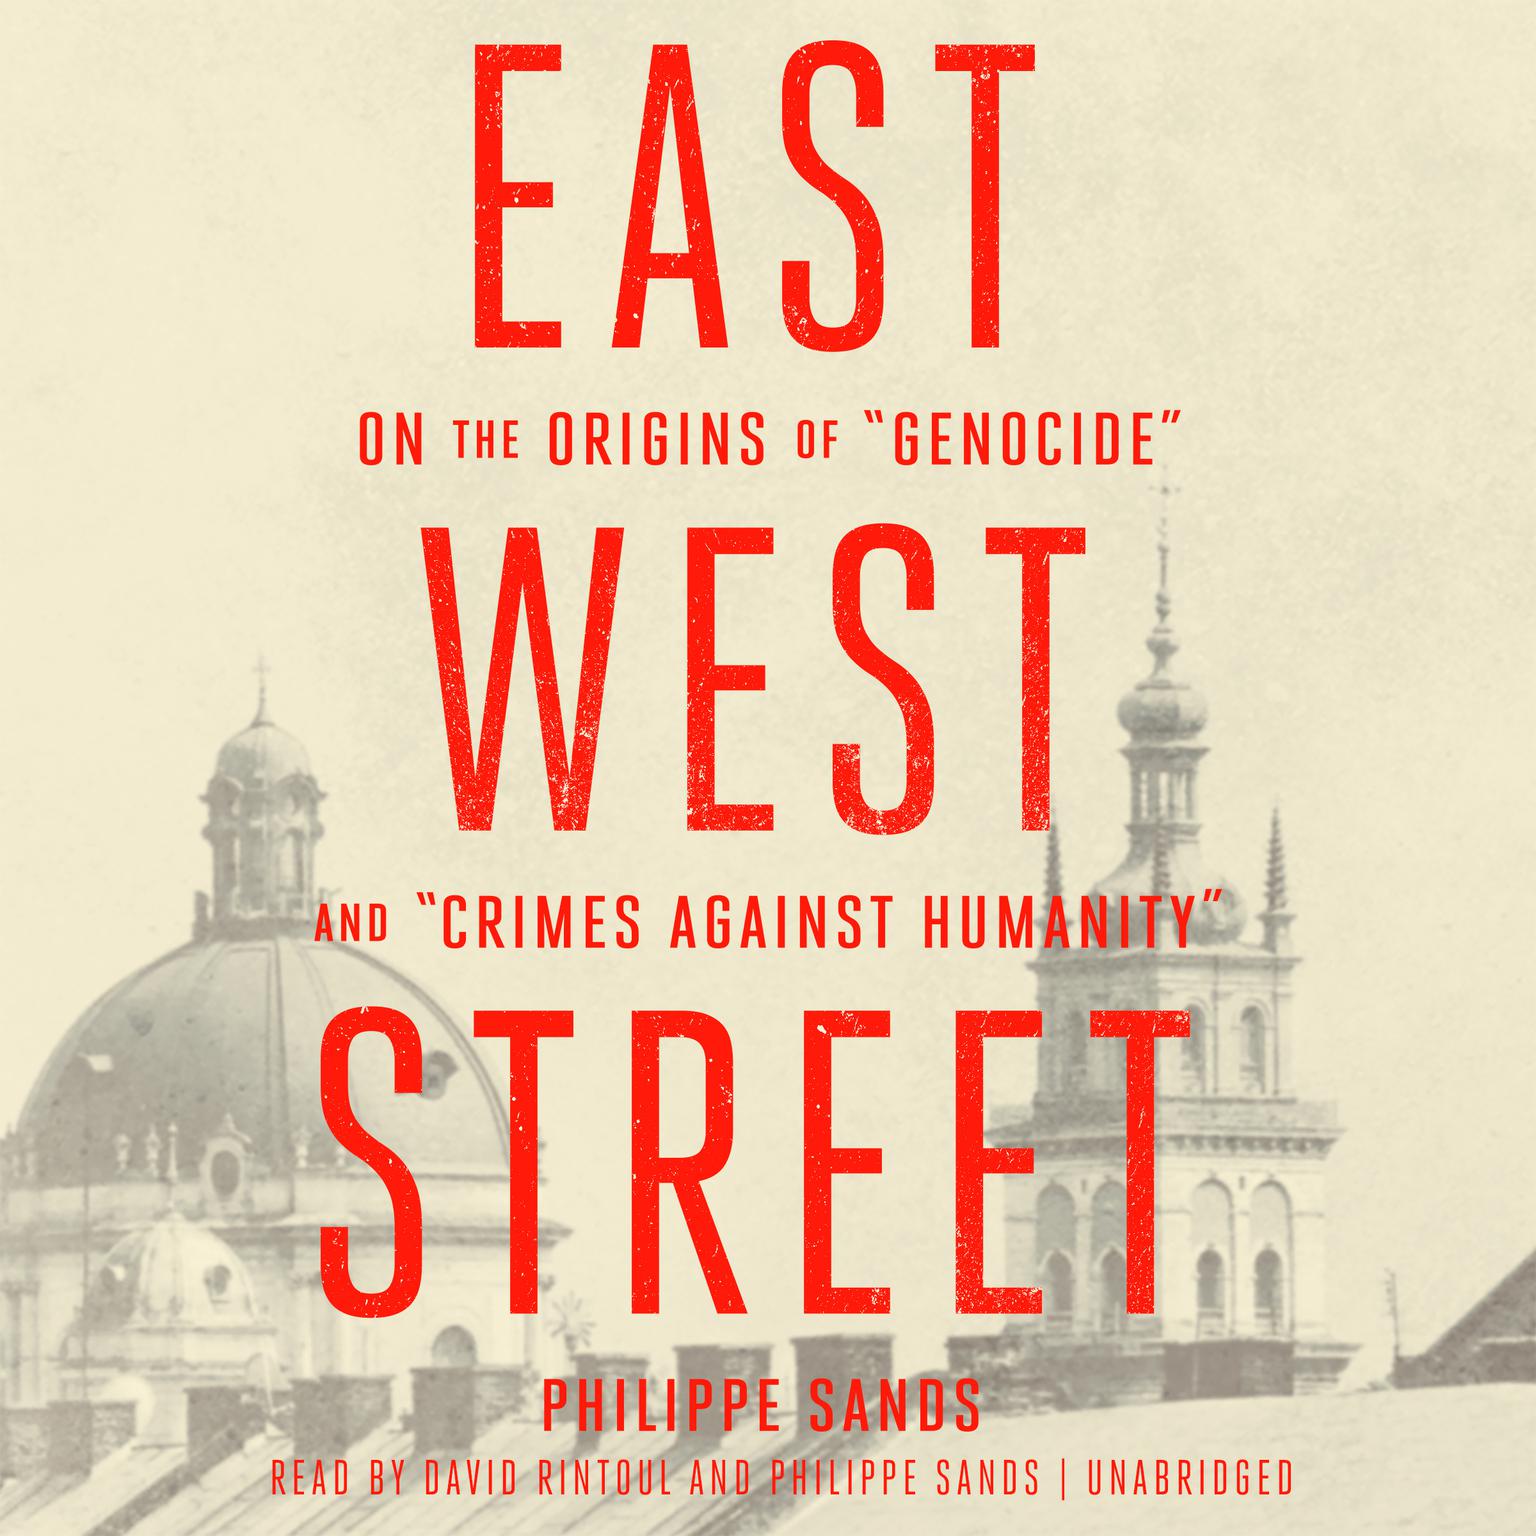 East West Street: On the Origins of “Genocide” and “Crimes against Humanity” Audiobook, by Philippe Sands